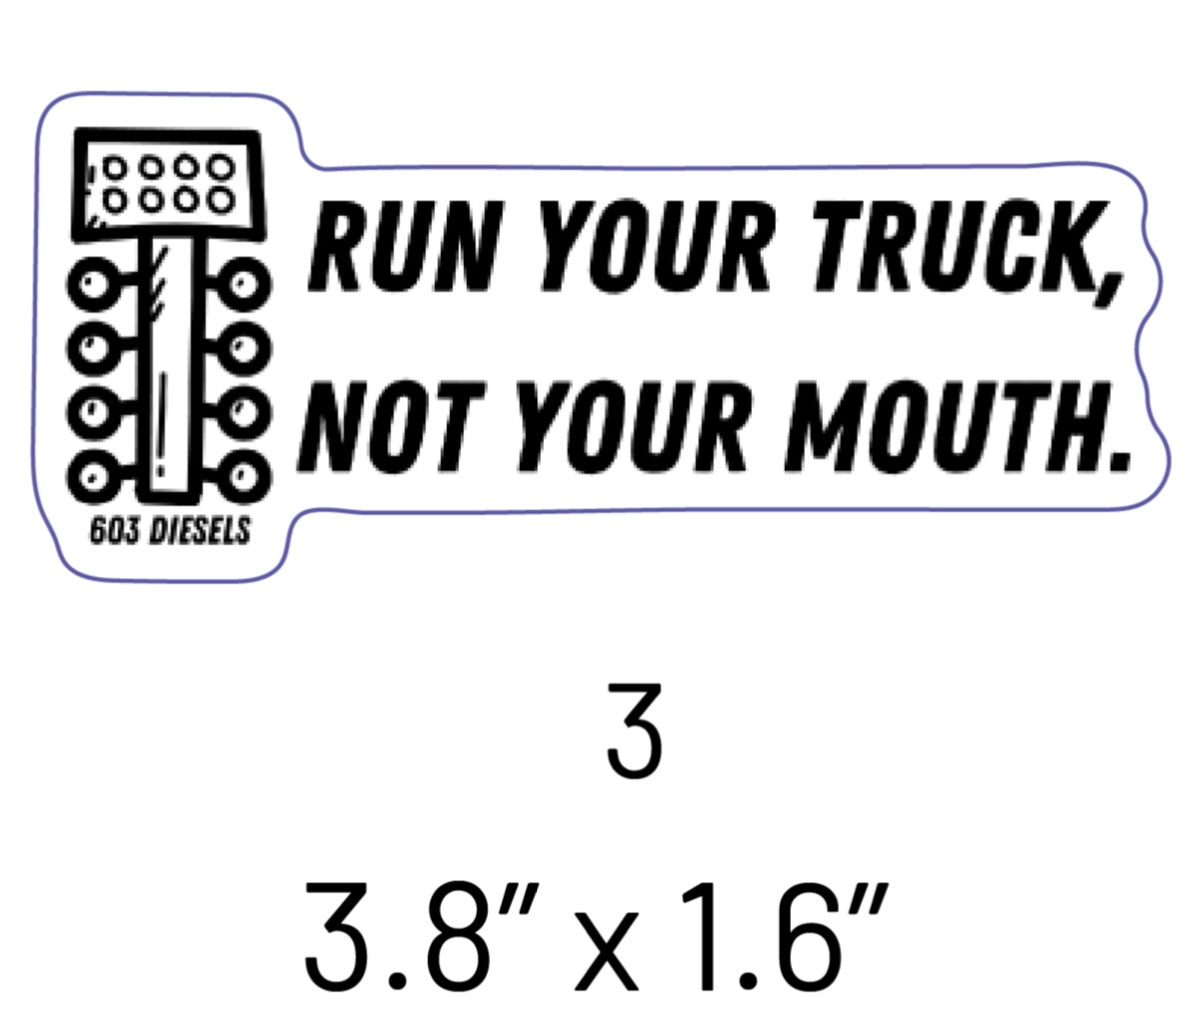 Run your truck, not your mouth Sticker